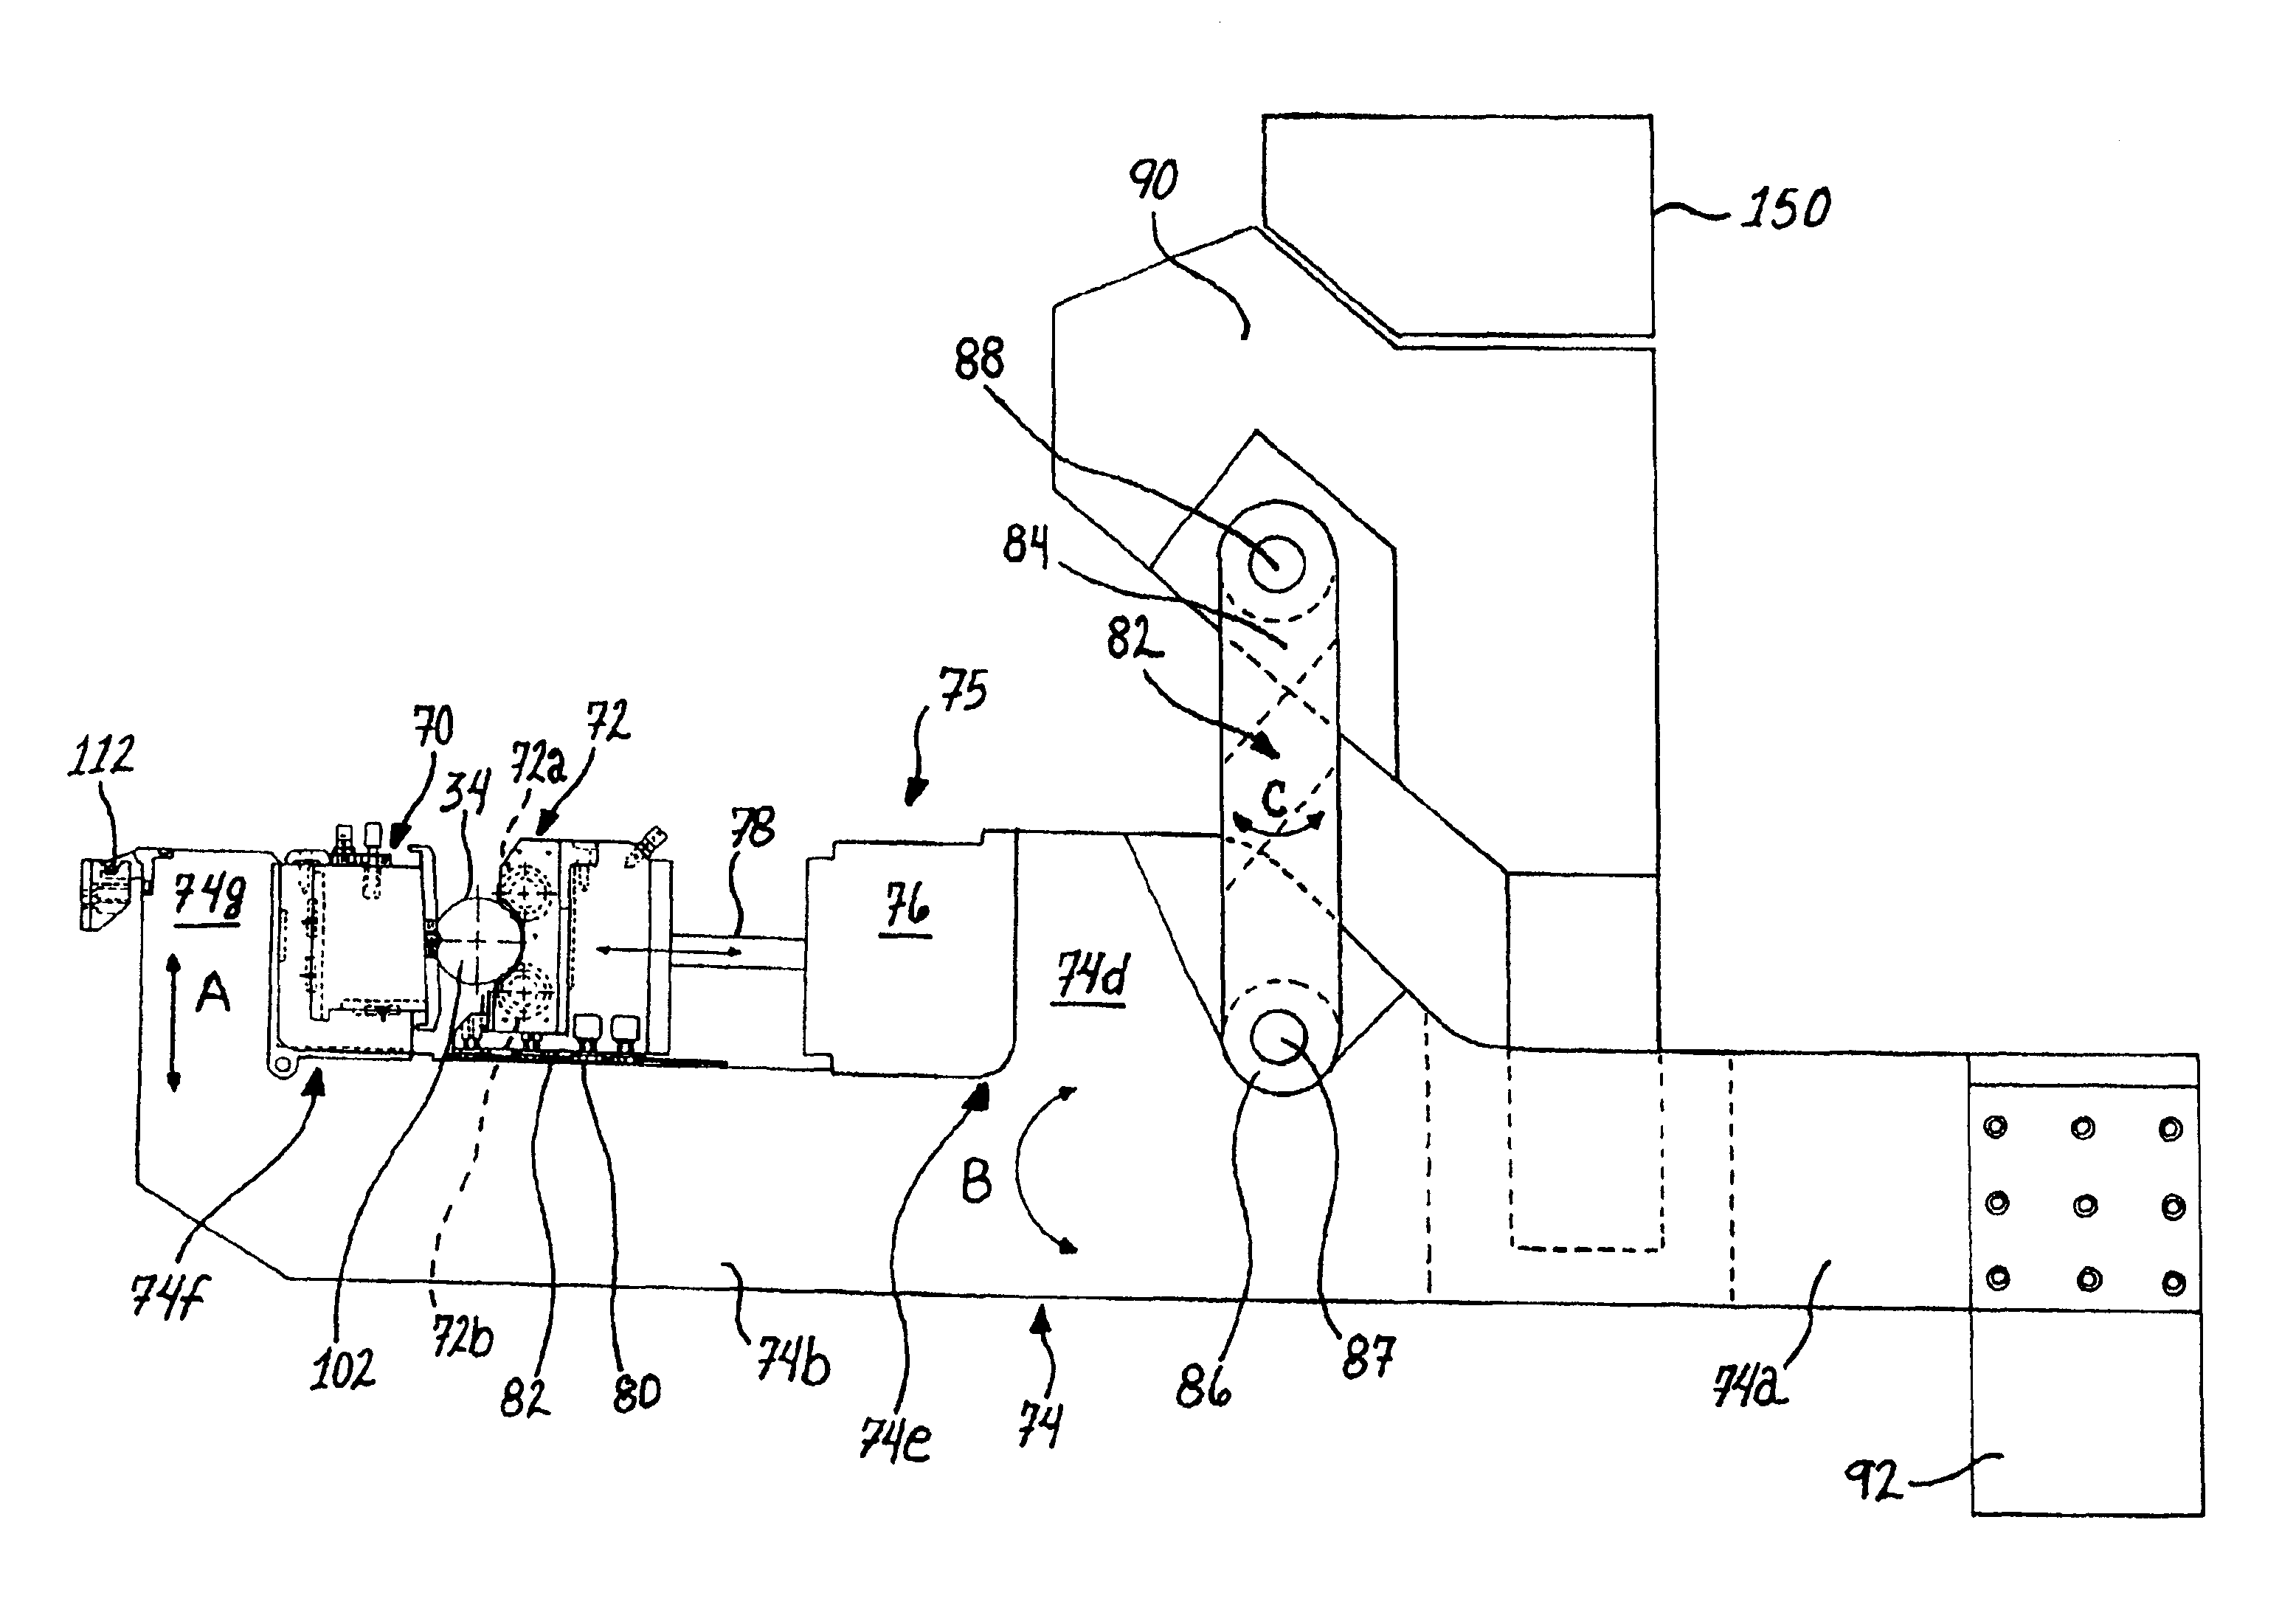 Apparatus and method for rolling workpieces